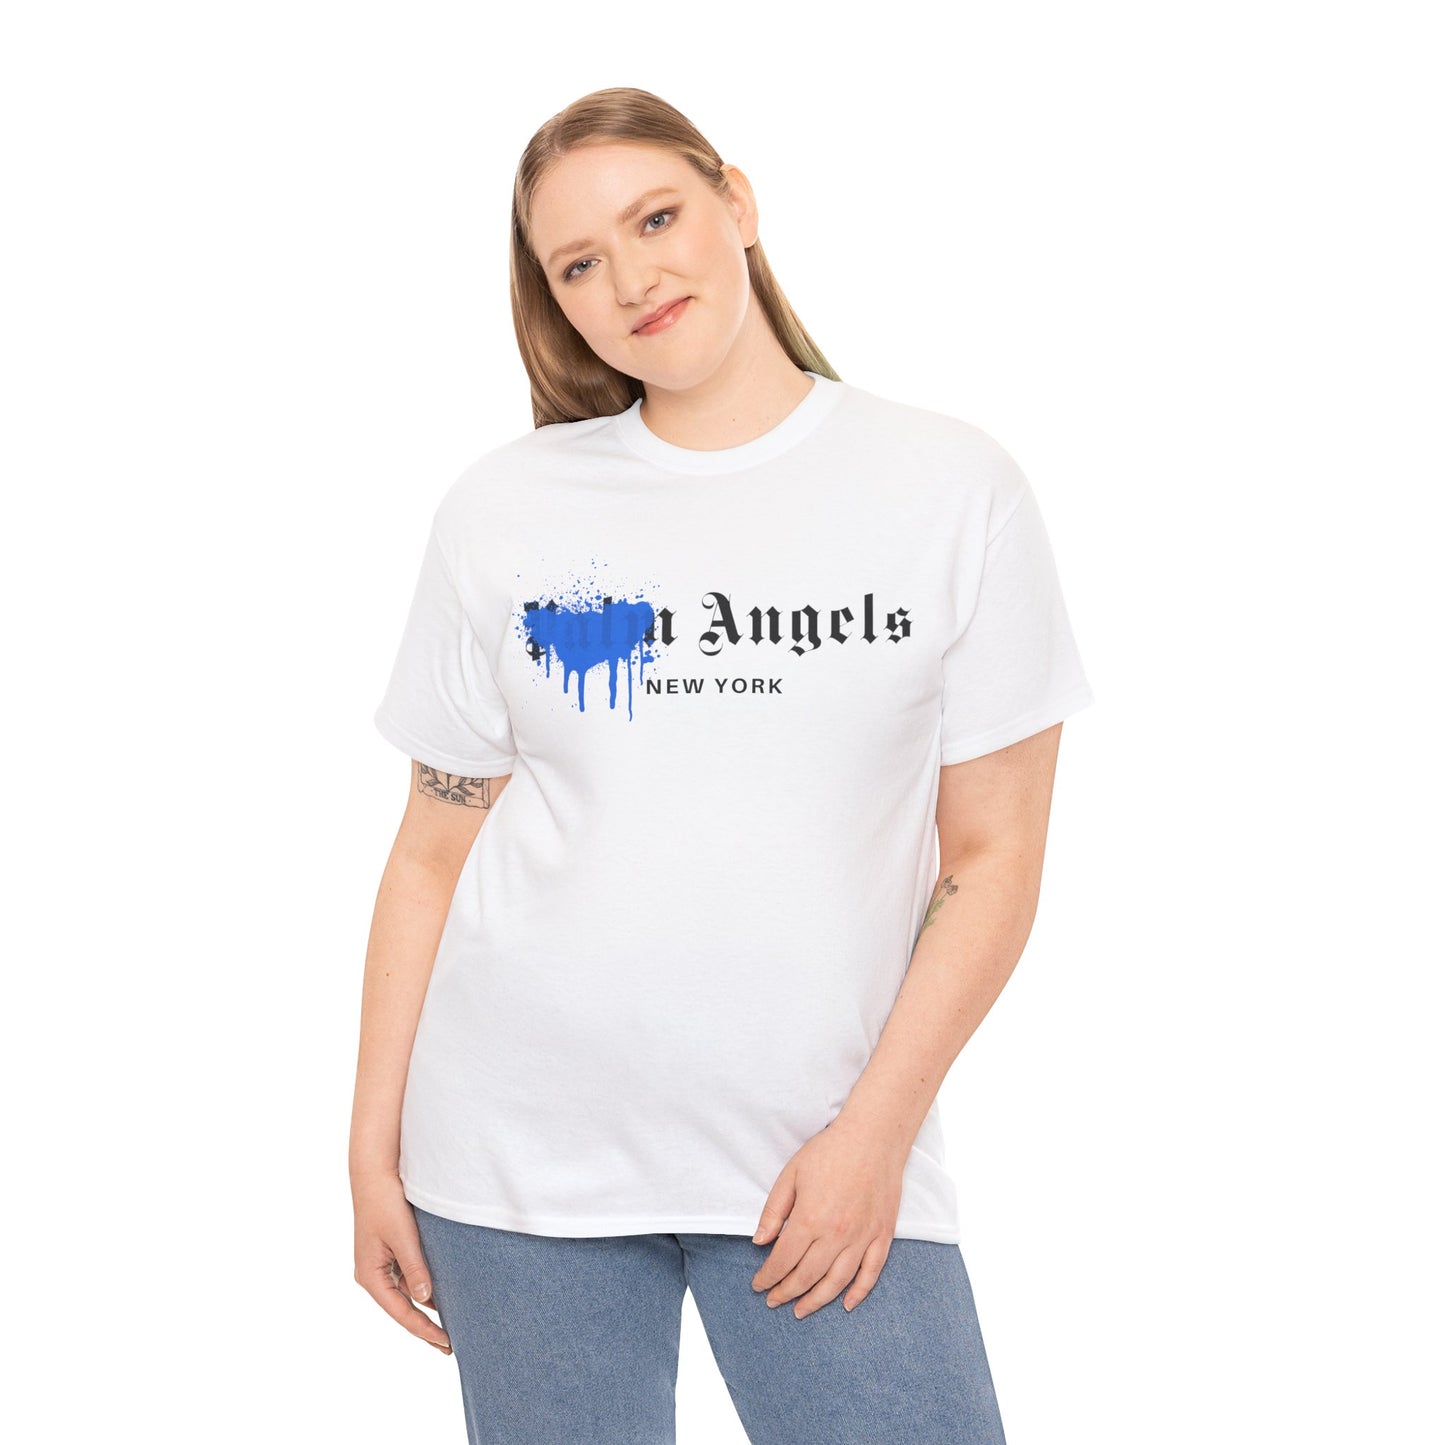 Dupe It Palm Angles NY Inspired Tee - Iconic Unisex Cotton T-Shirt